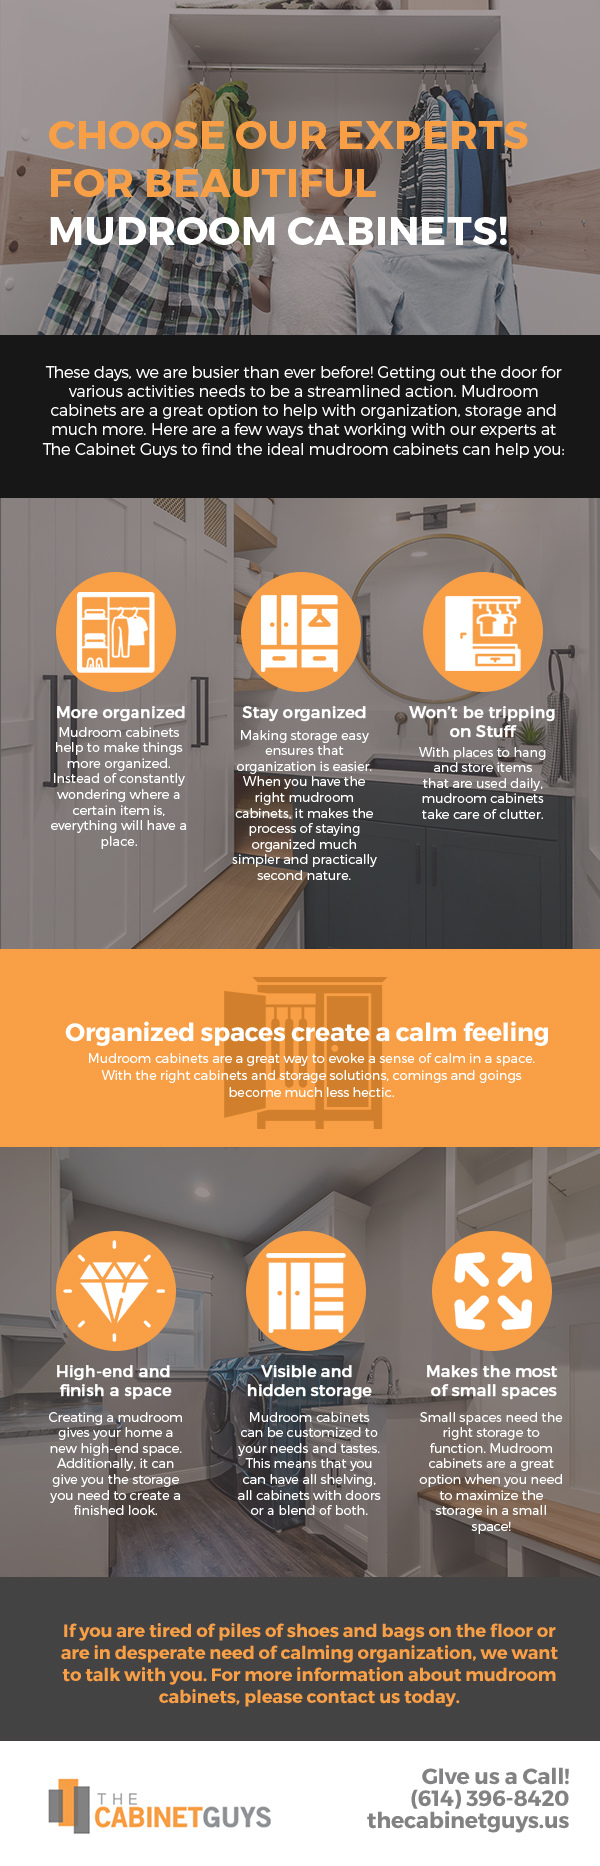 Choose Our Experts for Beautiful Mudroom Cabinets! [infographic]